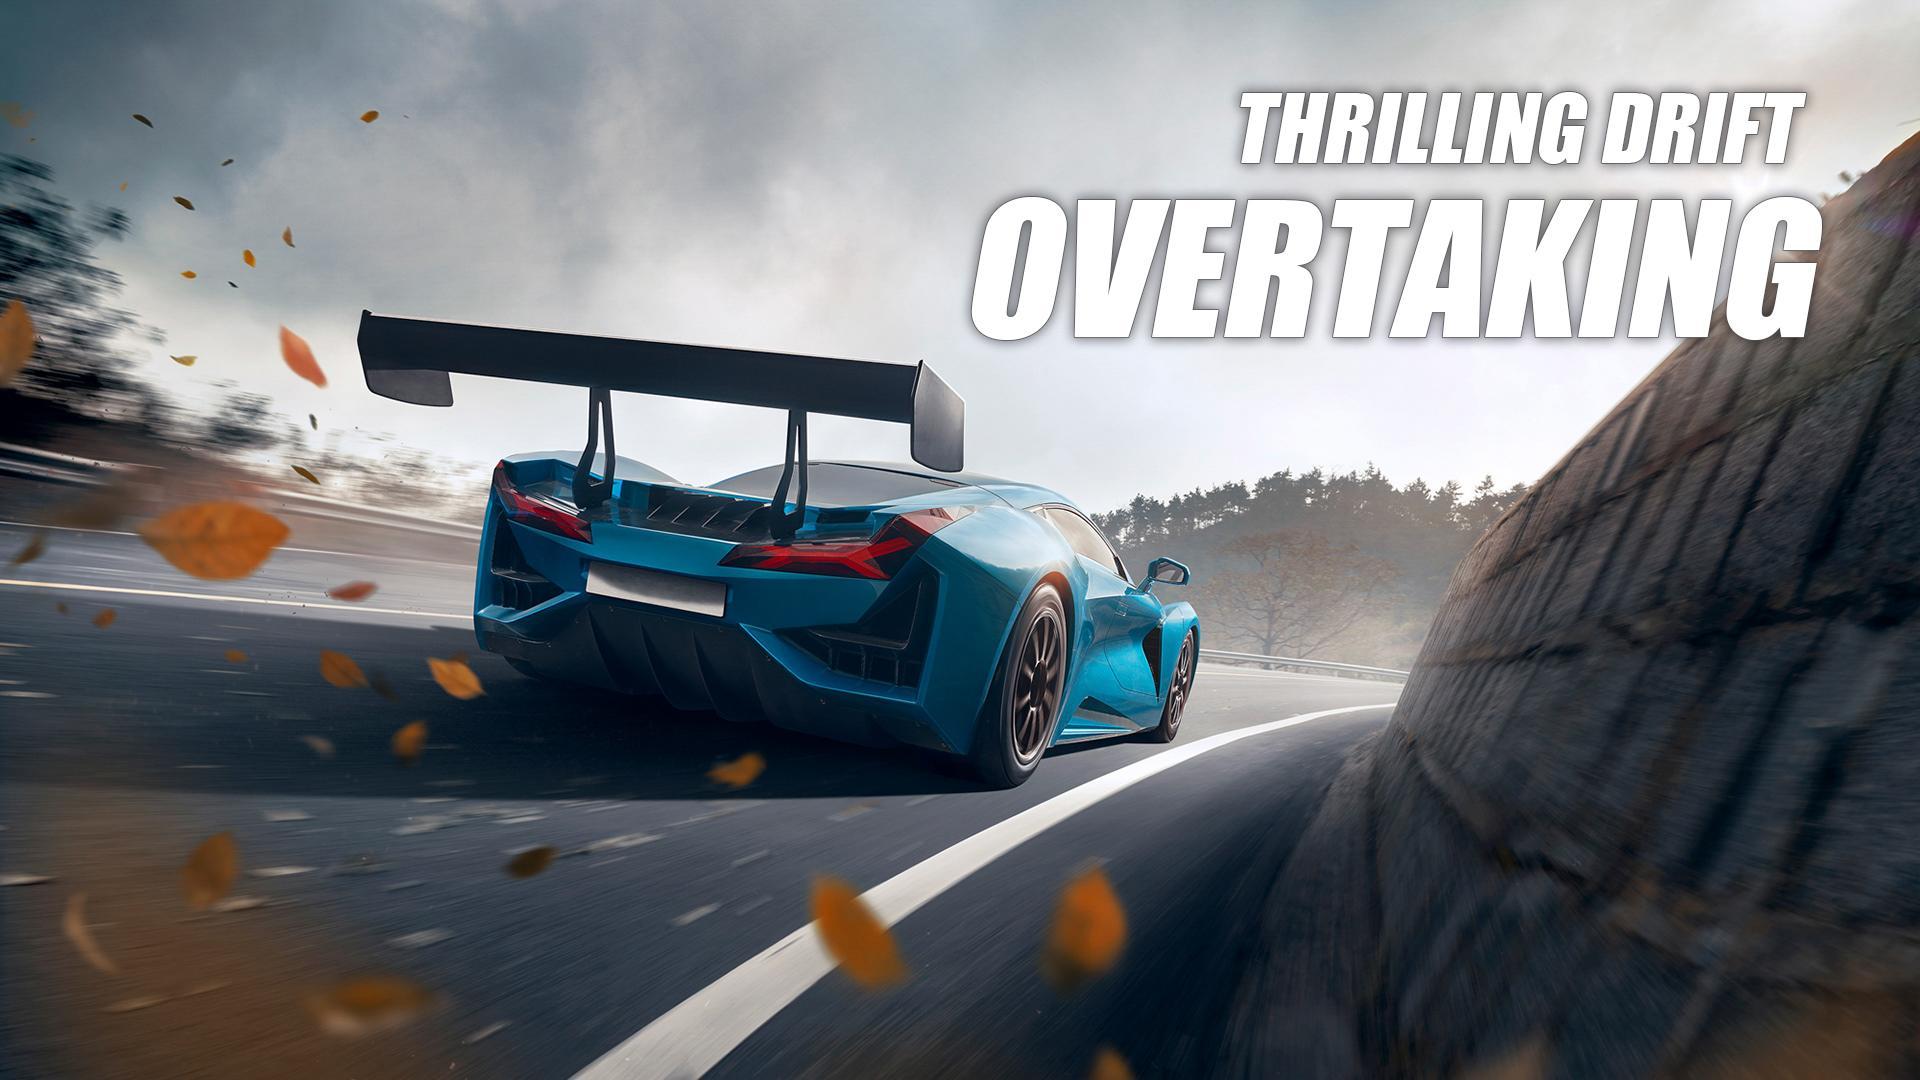 Fatal Racing for Android - APK Download